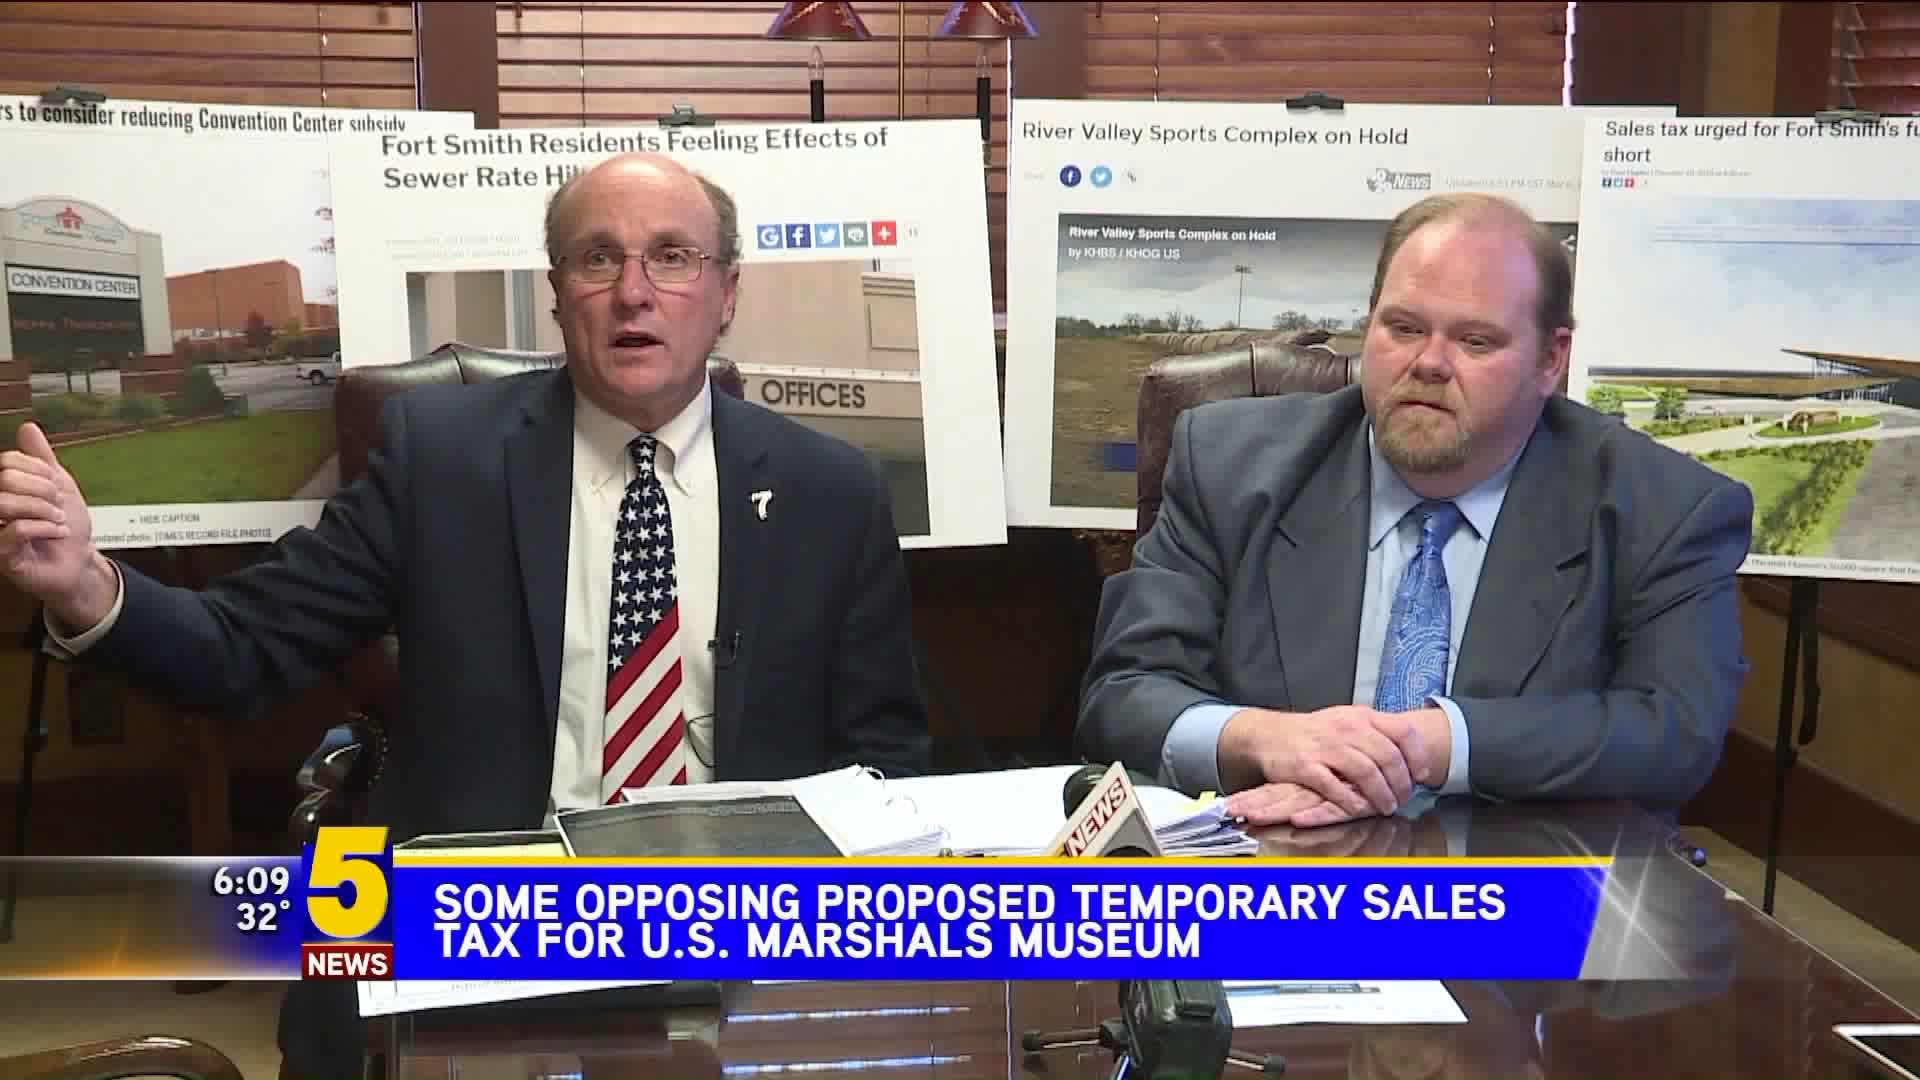 Opposition To Temporary Sales Tax Hike For U.S. Marshals Museum